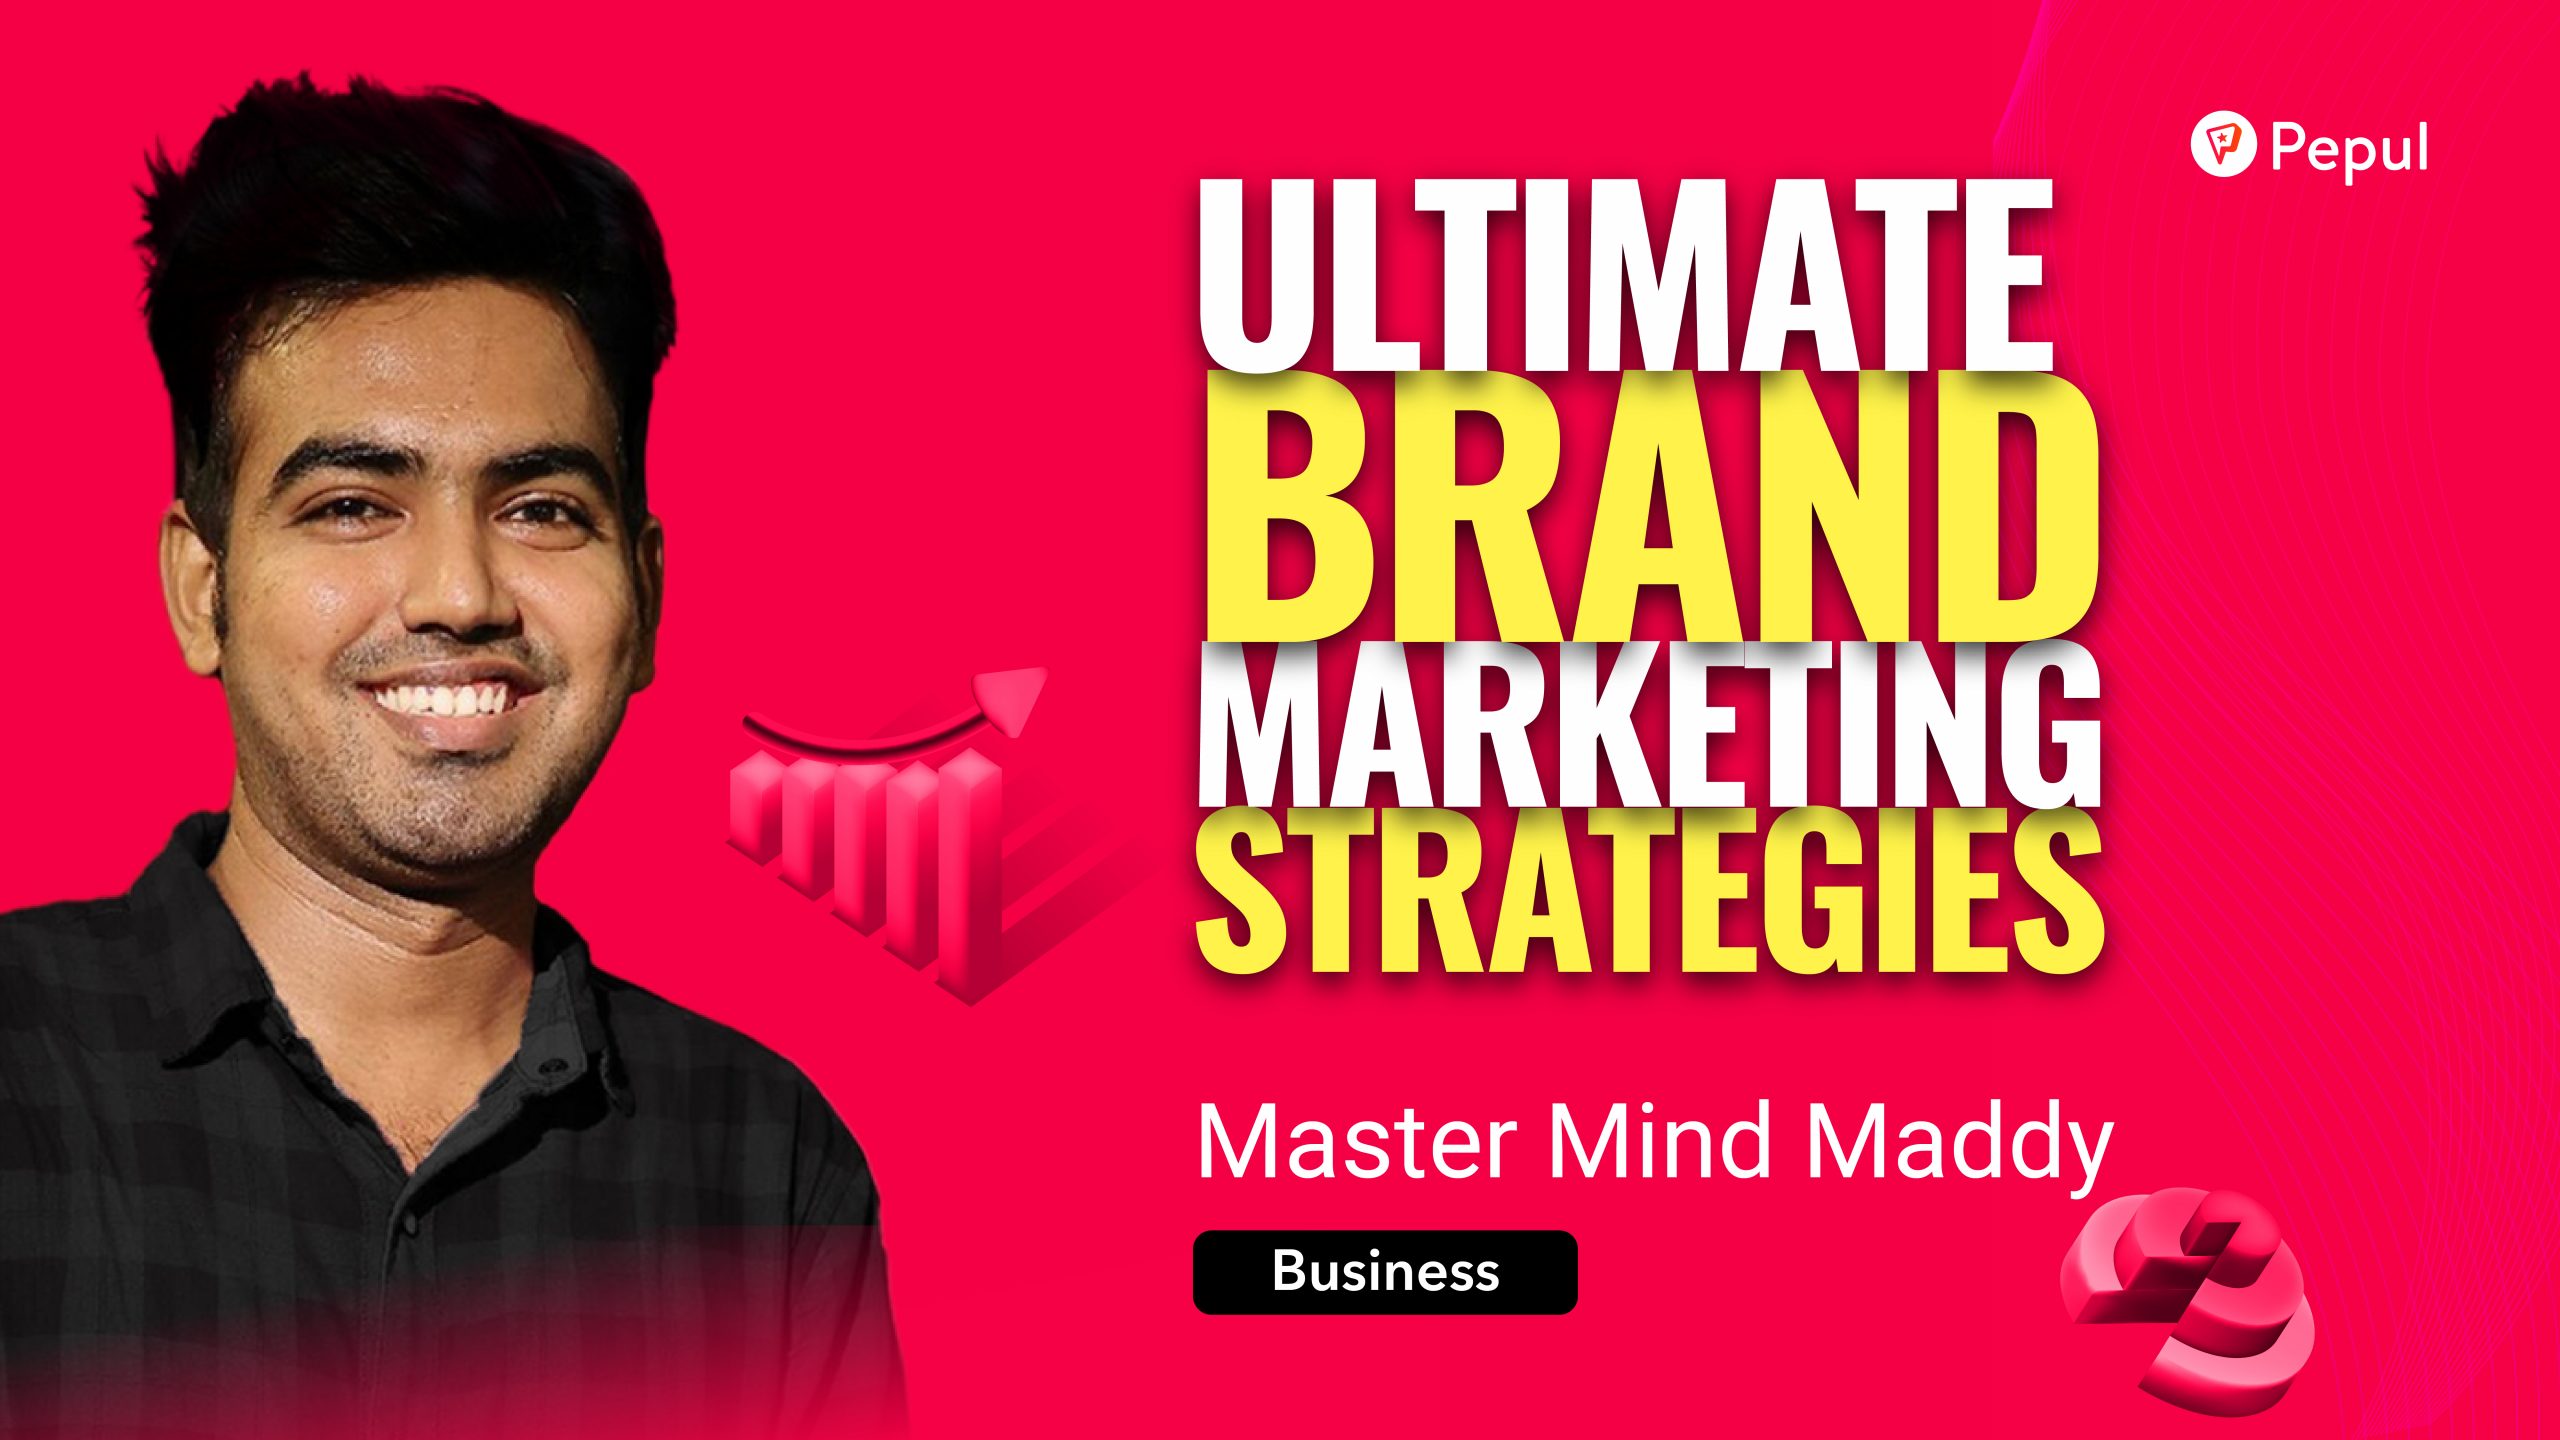 ultimate brand marketing strategies by master mind maddy